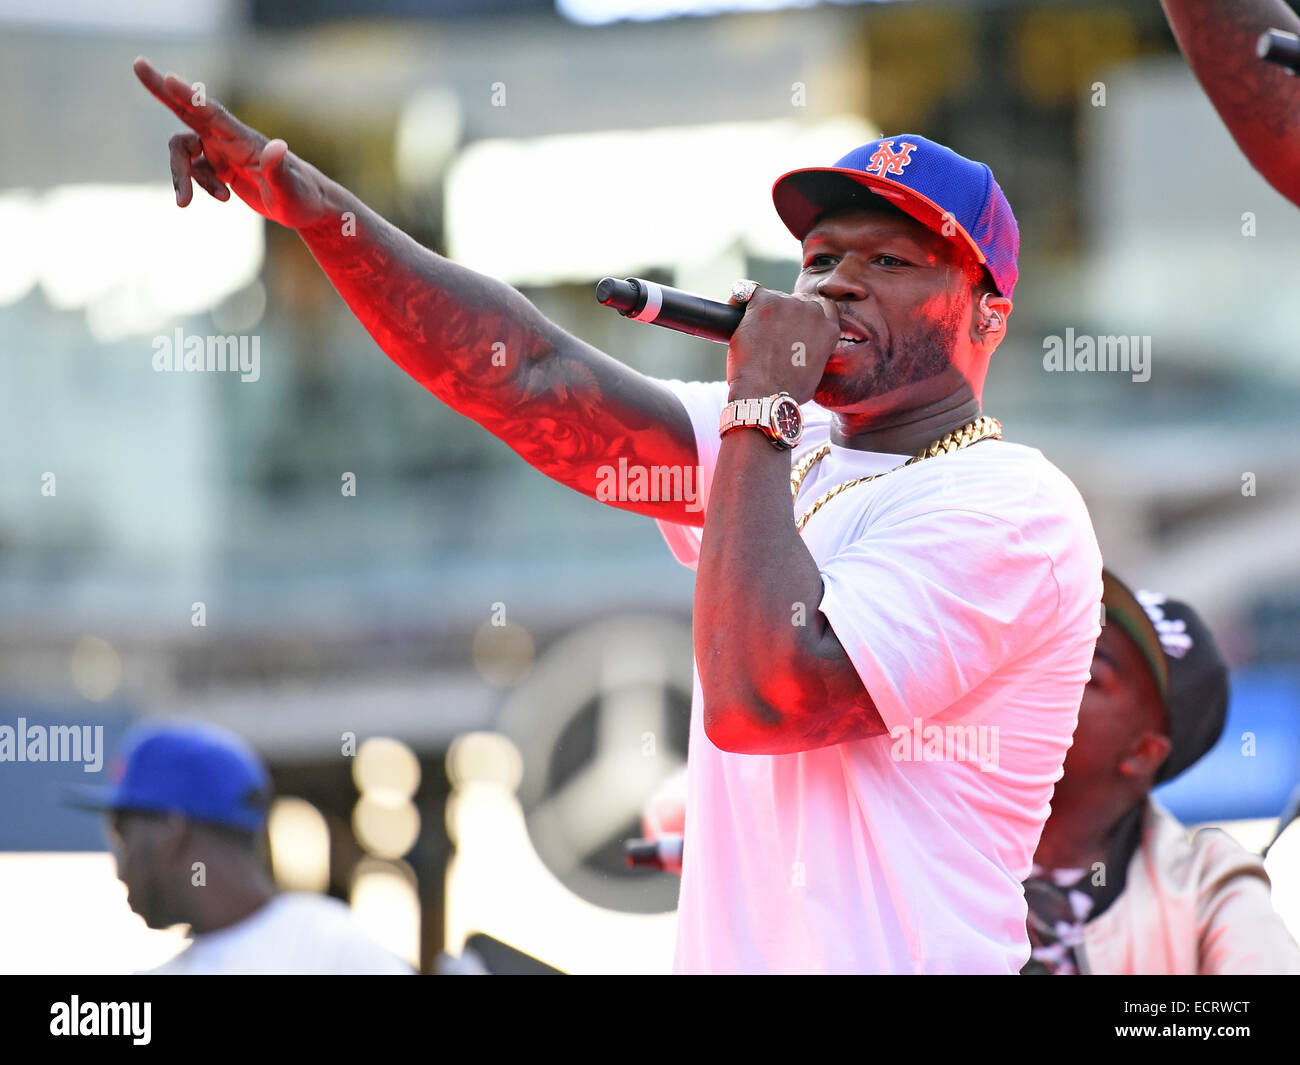 50 Cent performs live during a post-game concert at Citi Field on Saturday (14Jun14) following the New York Mets 0-5 loss against the San Diego Padres. This was a return to Citi Field for the rapper, who threw out what many are calling the worst first pit Stock Photo